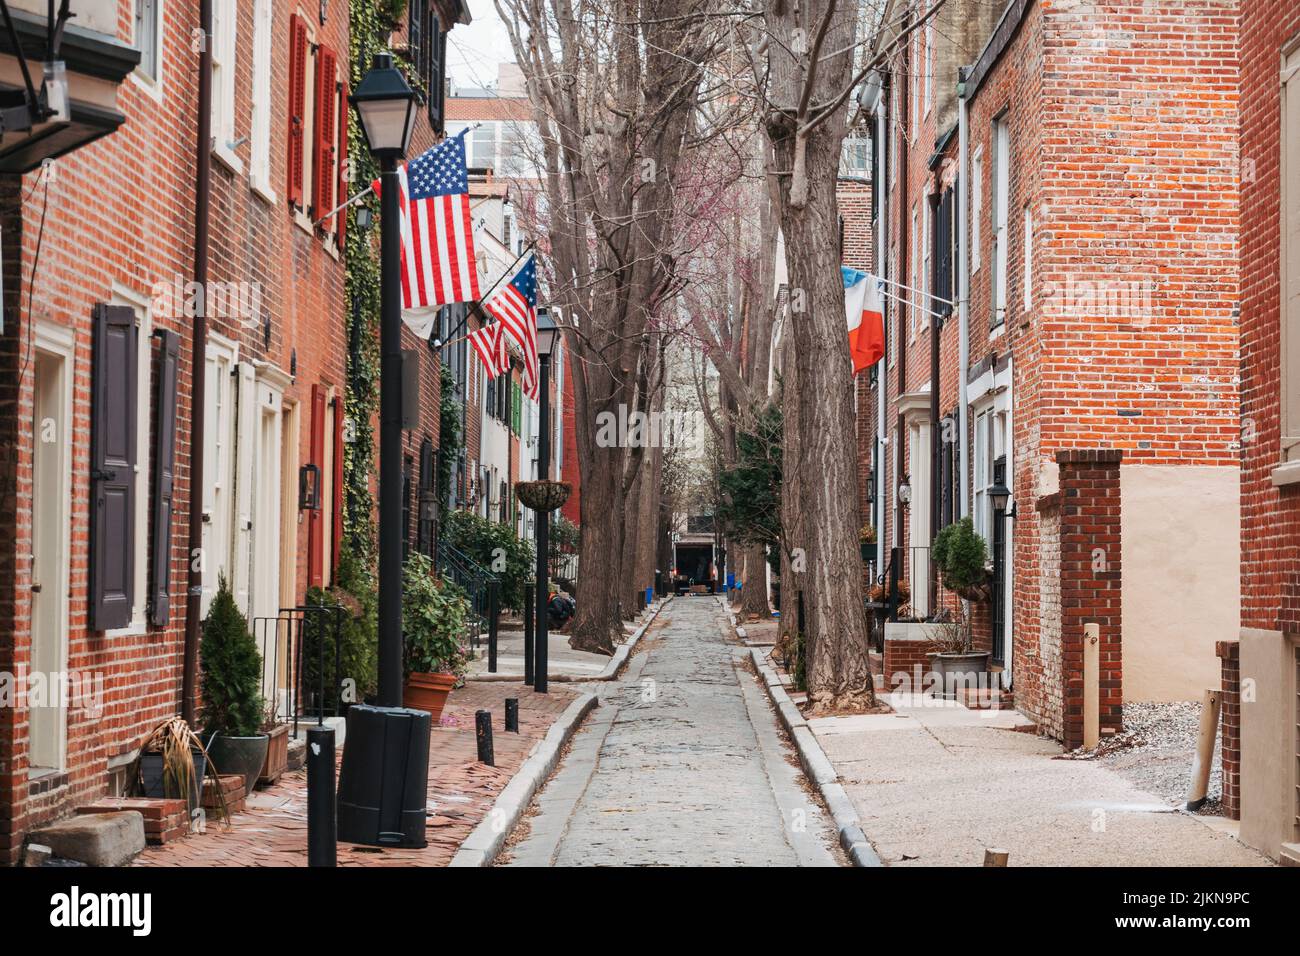 American and French flags from brick row homes in a narrow street in Philadelphia, USA Stock Photo